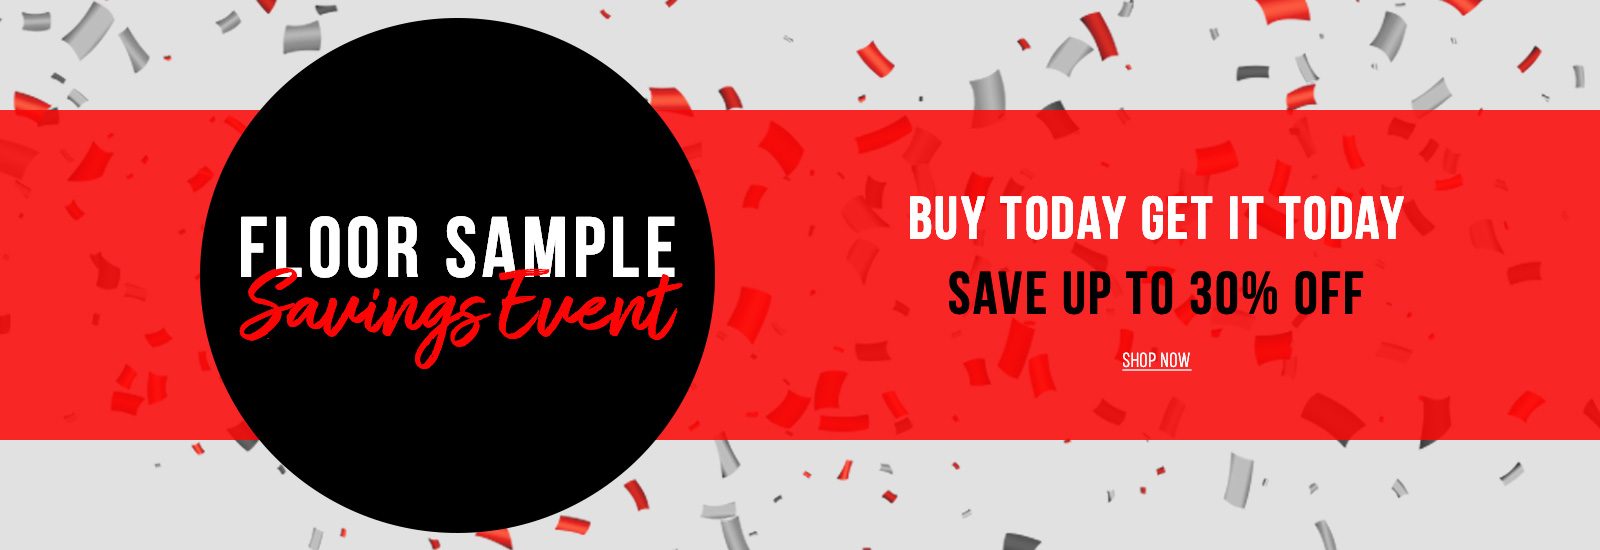 Floor Sample Savings Event - Buy Today Get it Today  - Save up to 30% off